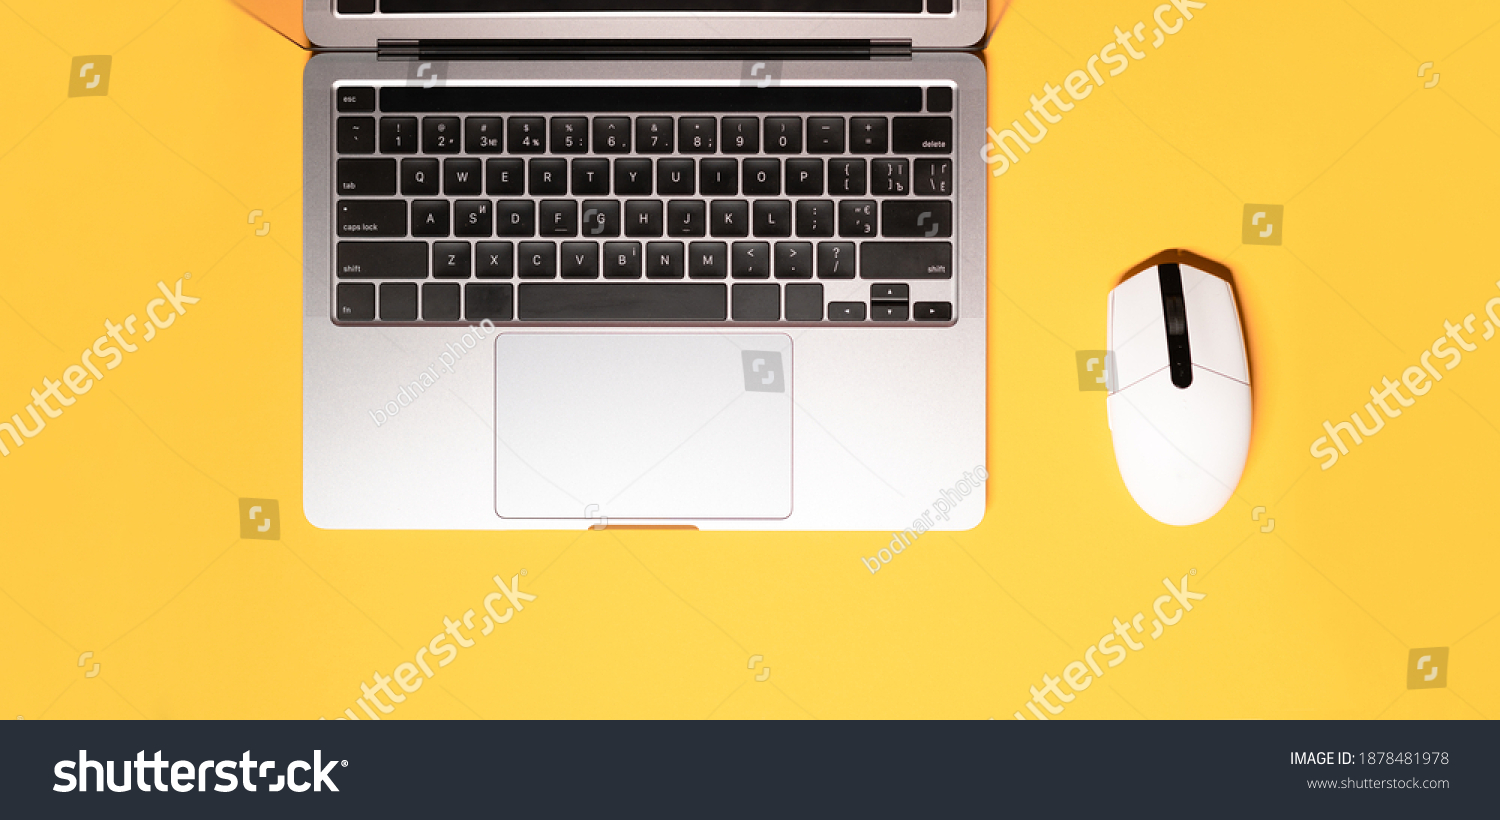 Horizontal flat lay minimalist photo with a silver grey laptop computer, and a wireless white-colored mouse on a yellow background. #1878481978